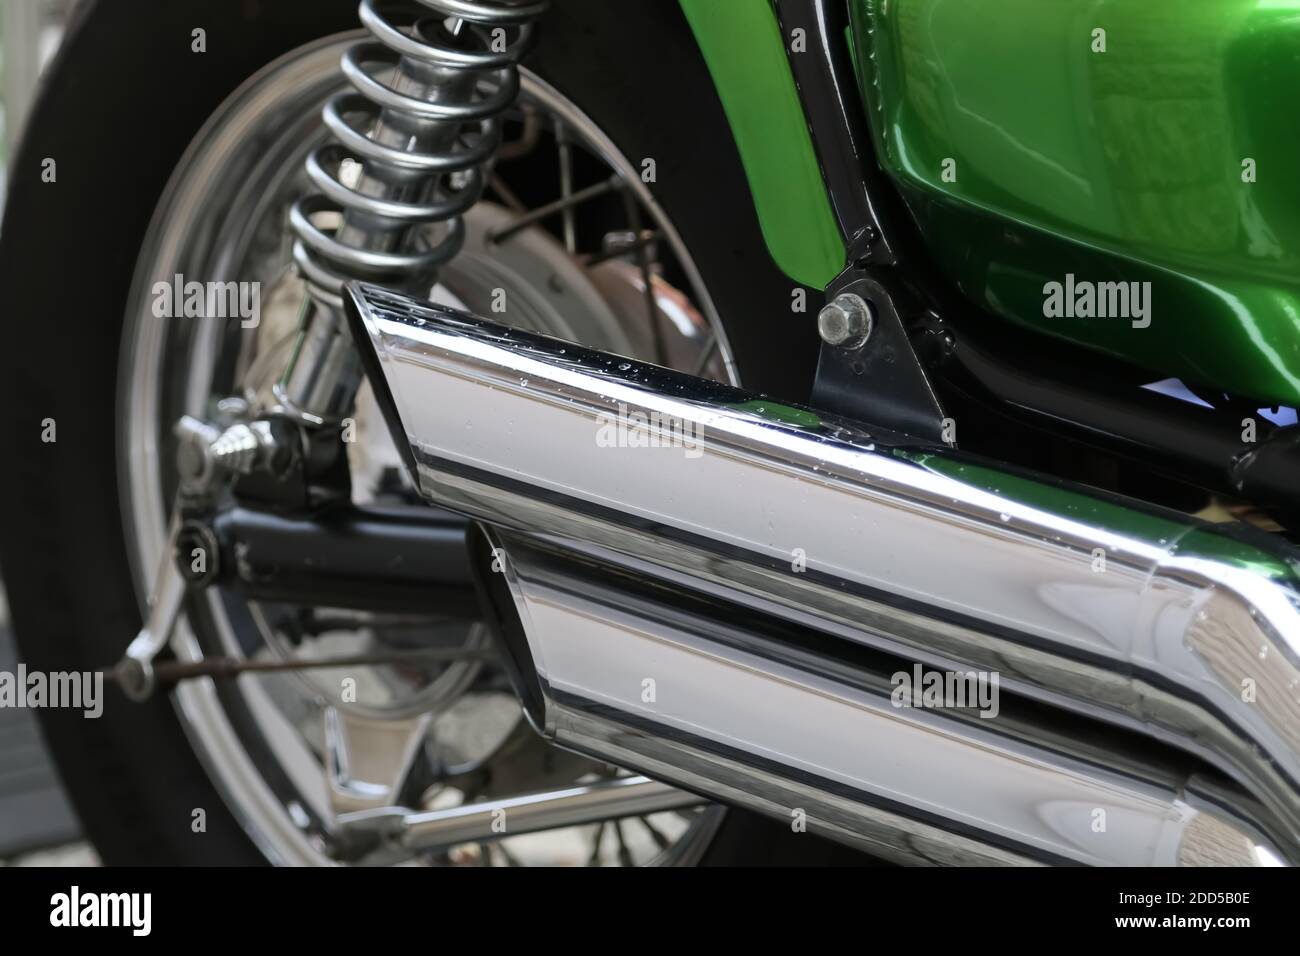 details of a customized motorcycle Stock Photo